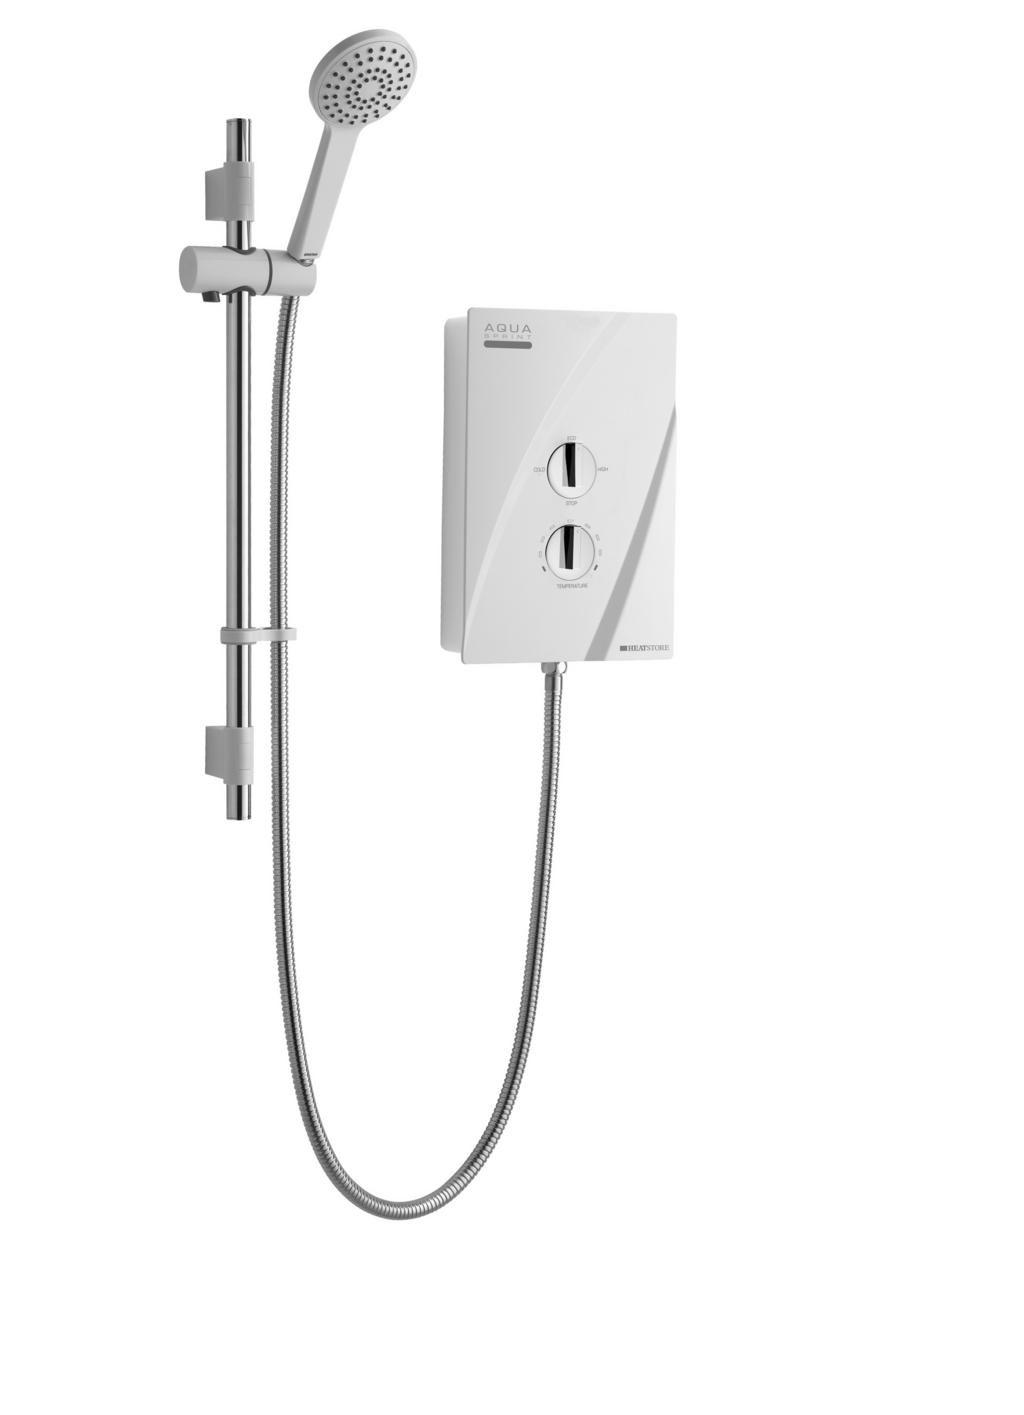 Aqua Sprint AQS8 Electric Shower Installation and Operating Instructions IMPORTANT SAFEGUARDS WHEN USING ANY ELECTRICAL APPLIANCE, BASIC SAFETY PRECAUTIONS SHOULD ALWAYS BE